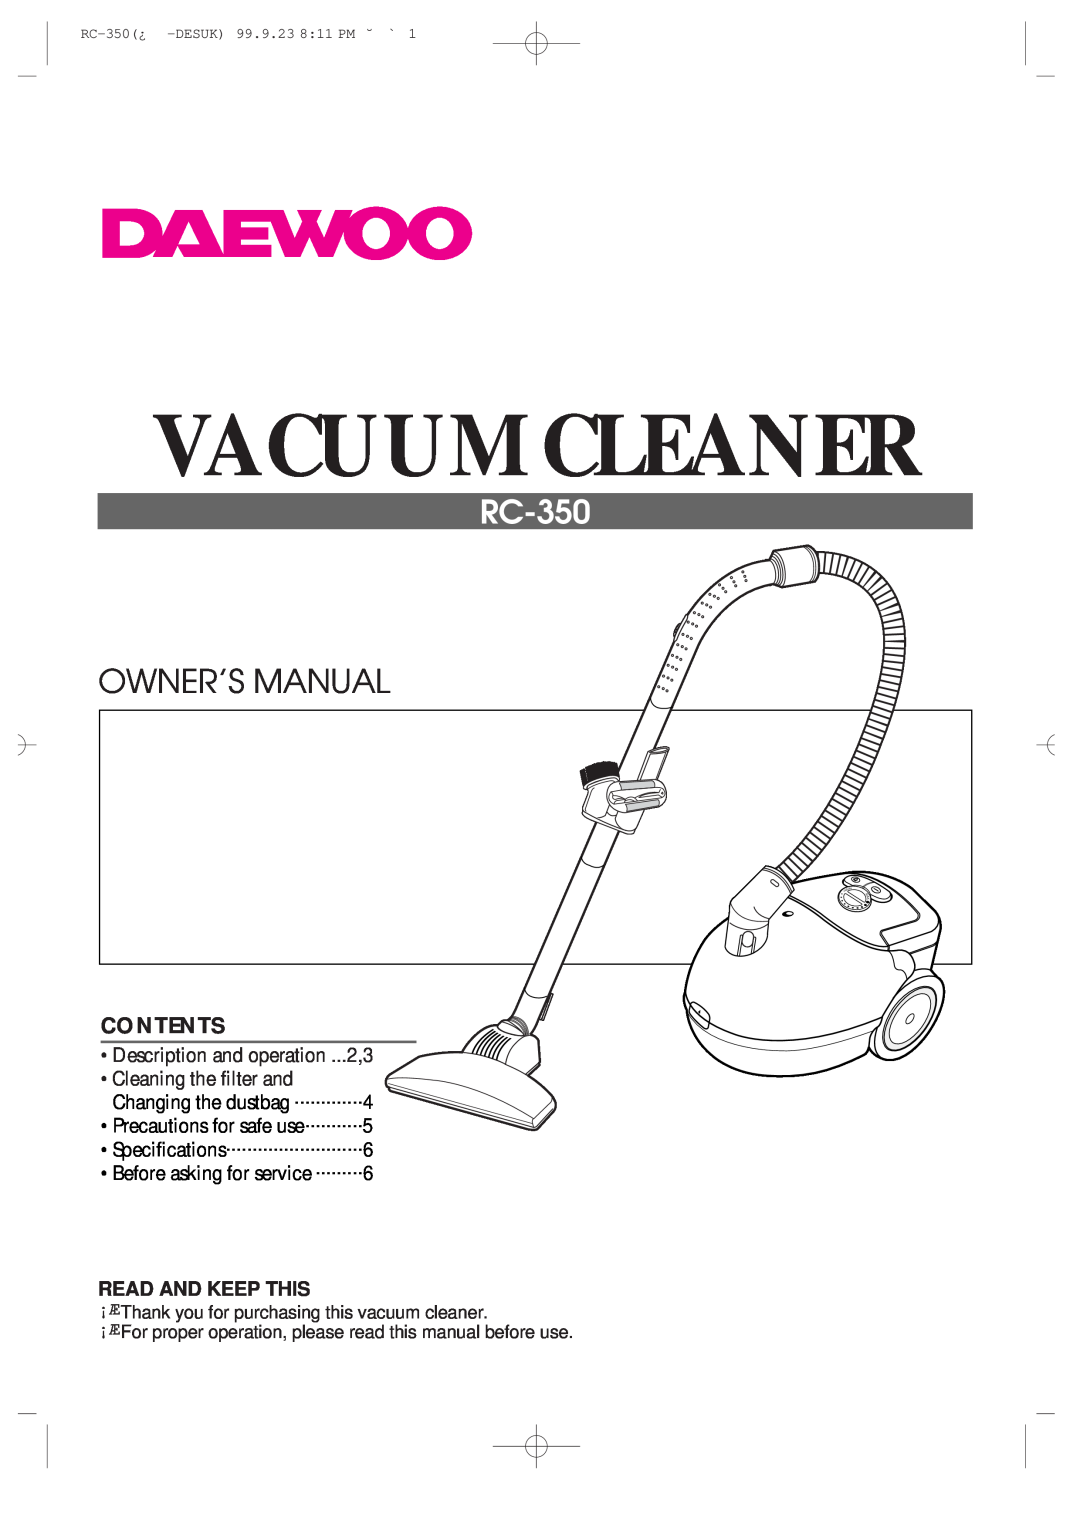 Daewoo RC-350 owner manual Read And Keep This, Vacuum Cleaner, Owner’S Manual, Contents, Specifications 